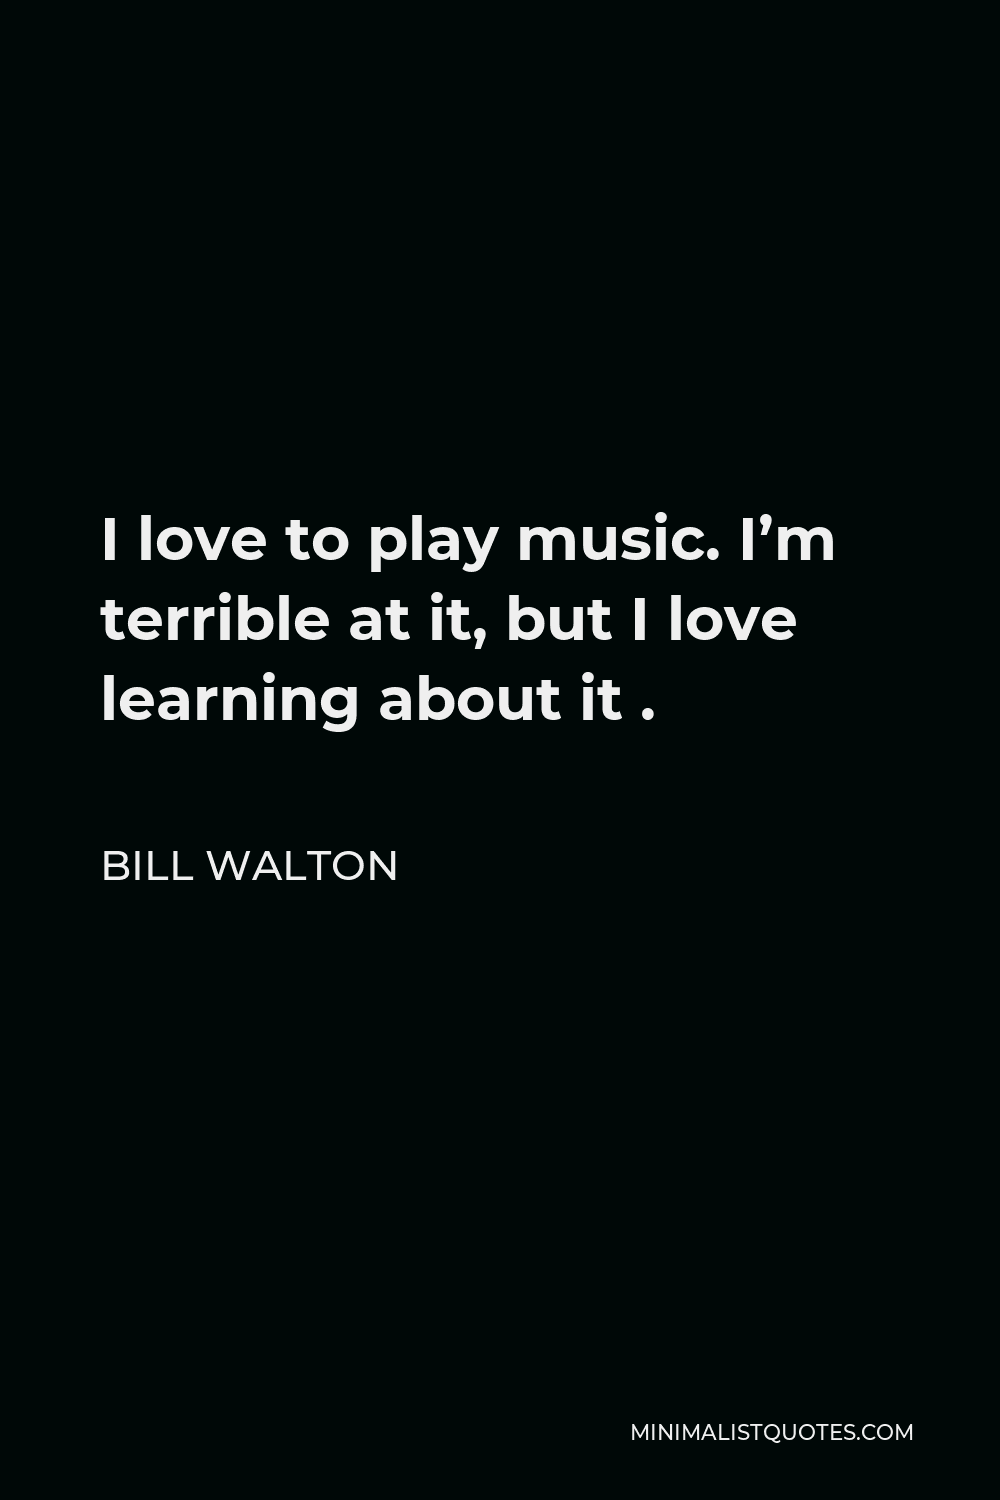 Bill Walton Quote - I love to play music. I’m terrible at it, but I love learning about it .